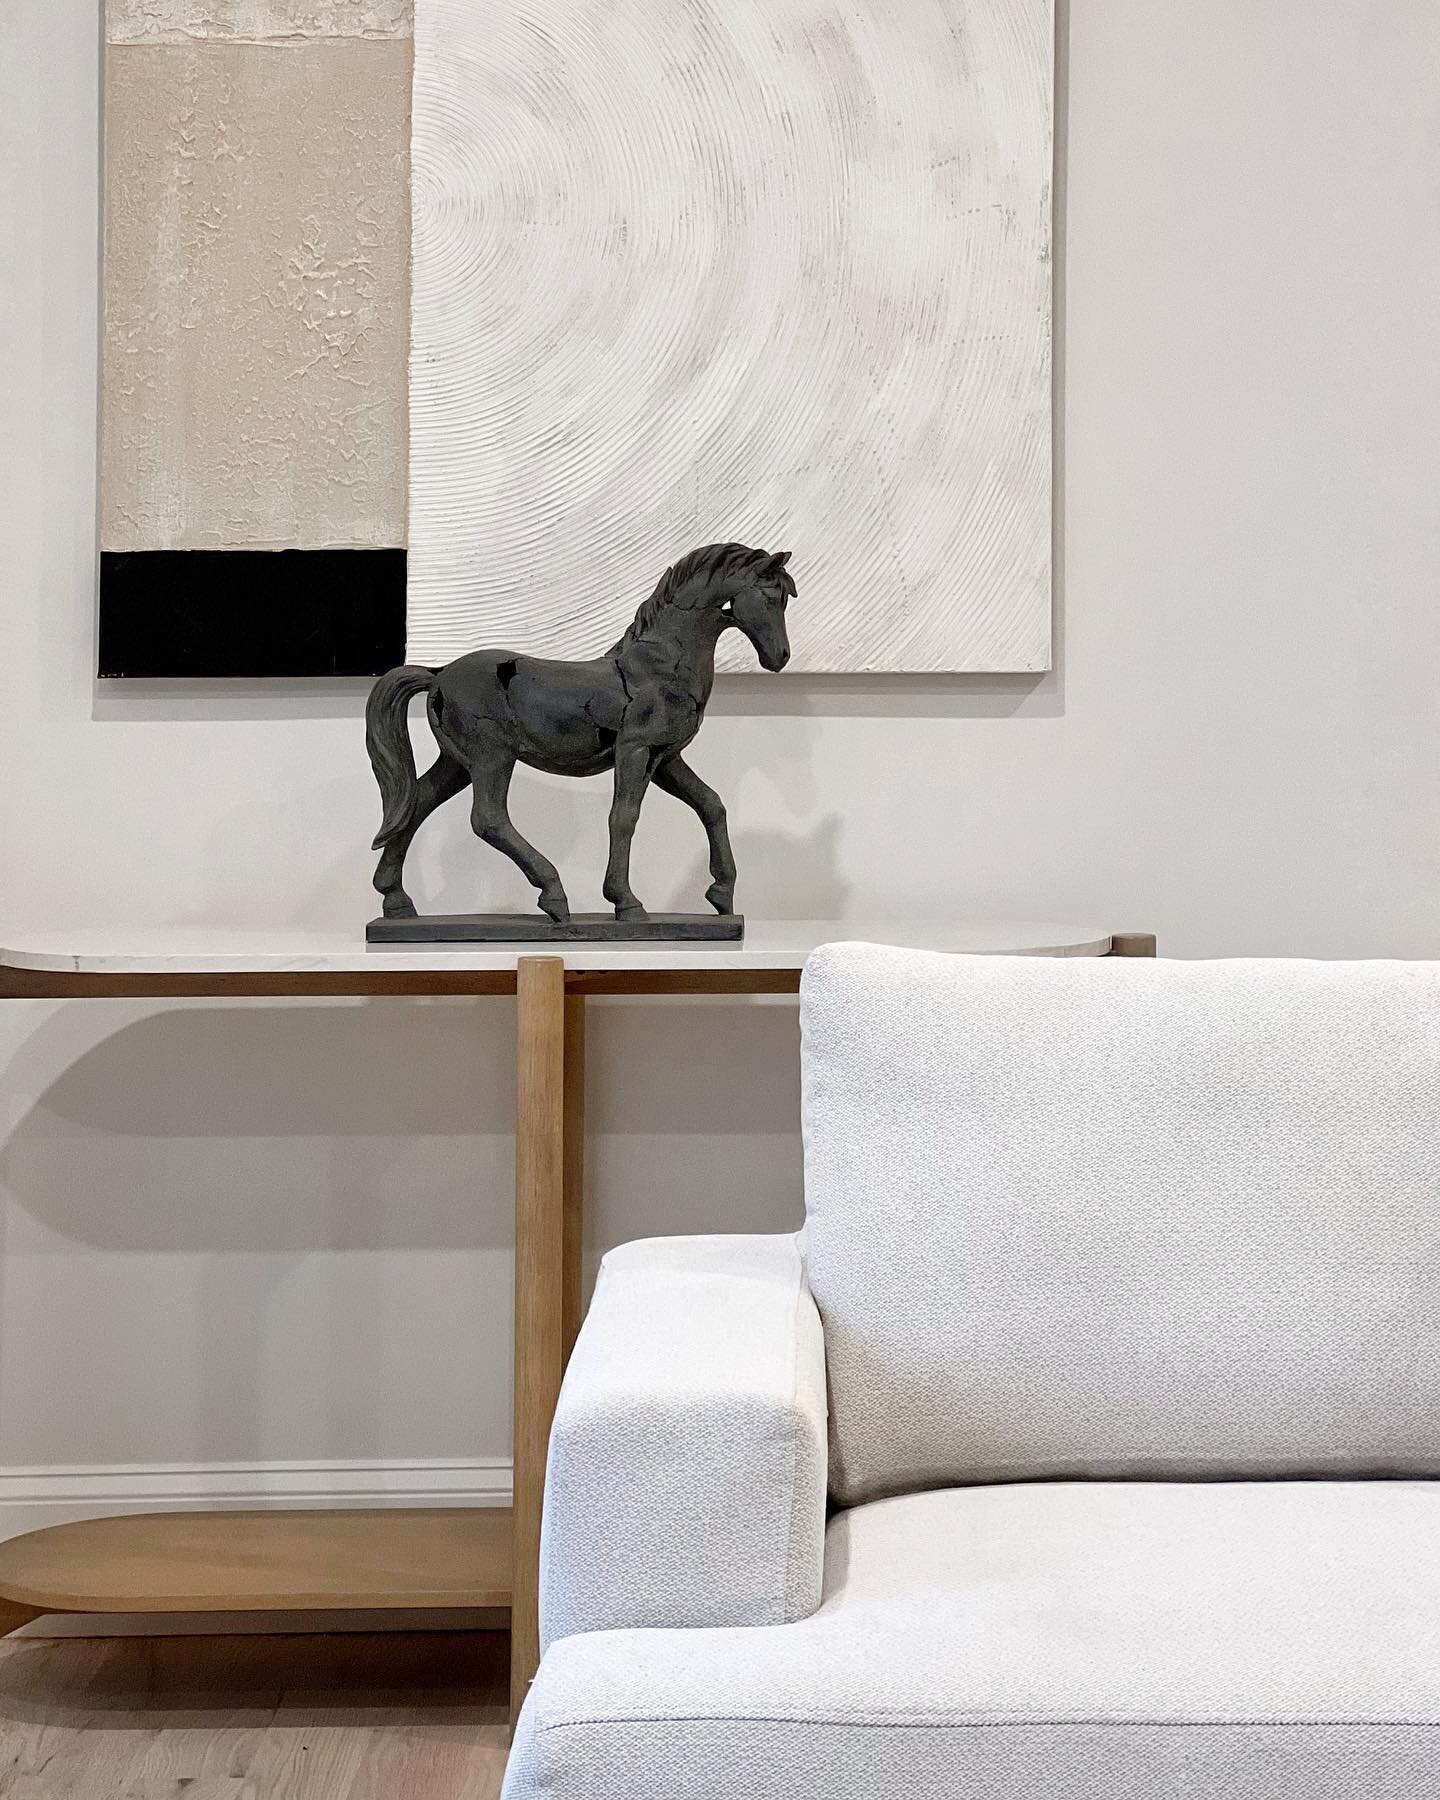 Full day of staging today and the only picture I managed to capture was of old Stewball, the race horse. 
&bull;
#roomserviceplease #homestaging #staginghomes #staging #propertystaging #homedecor #interiordecor